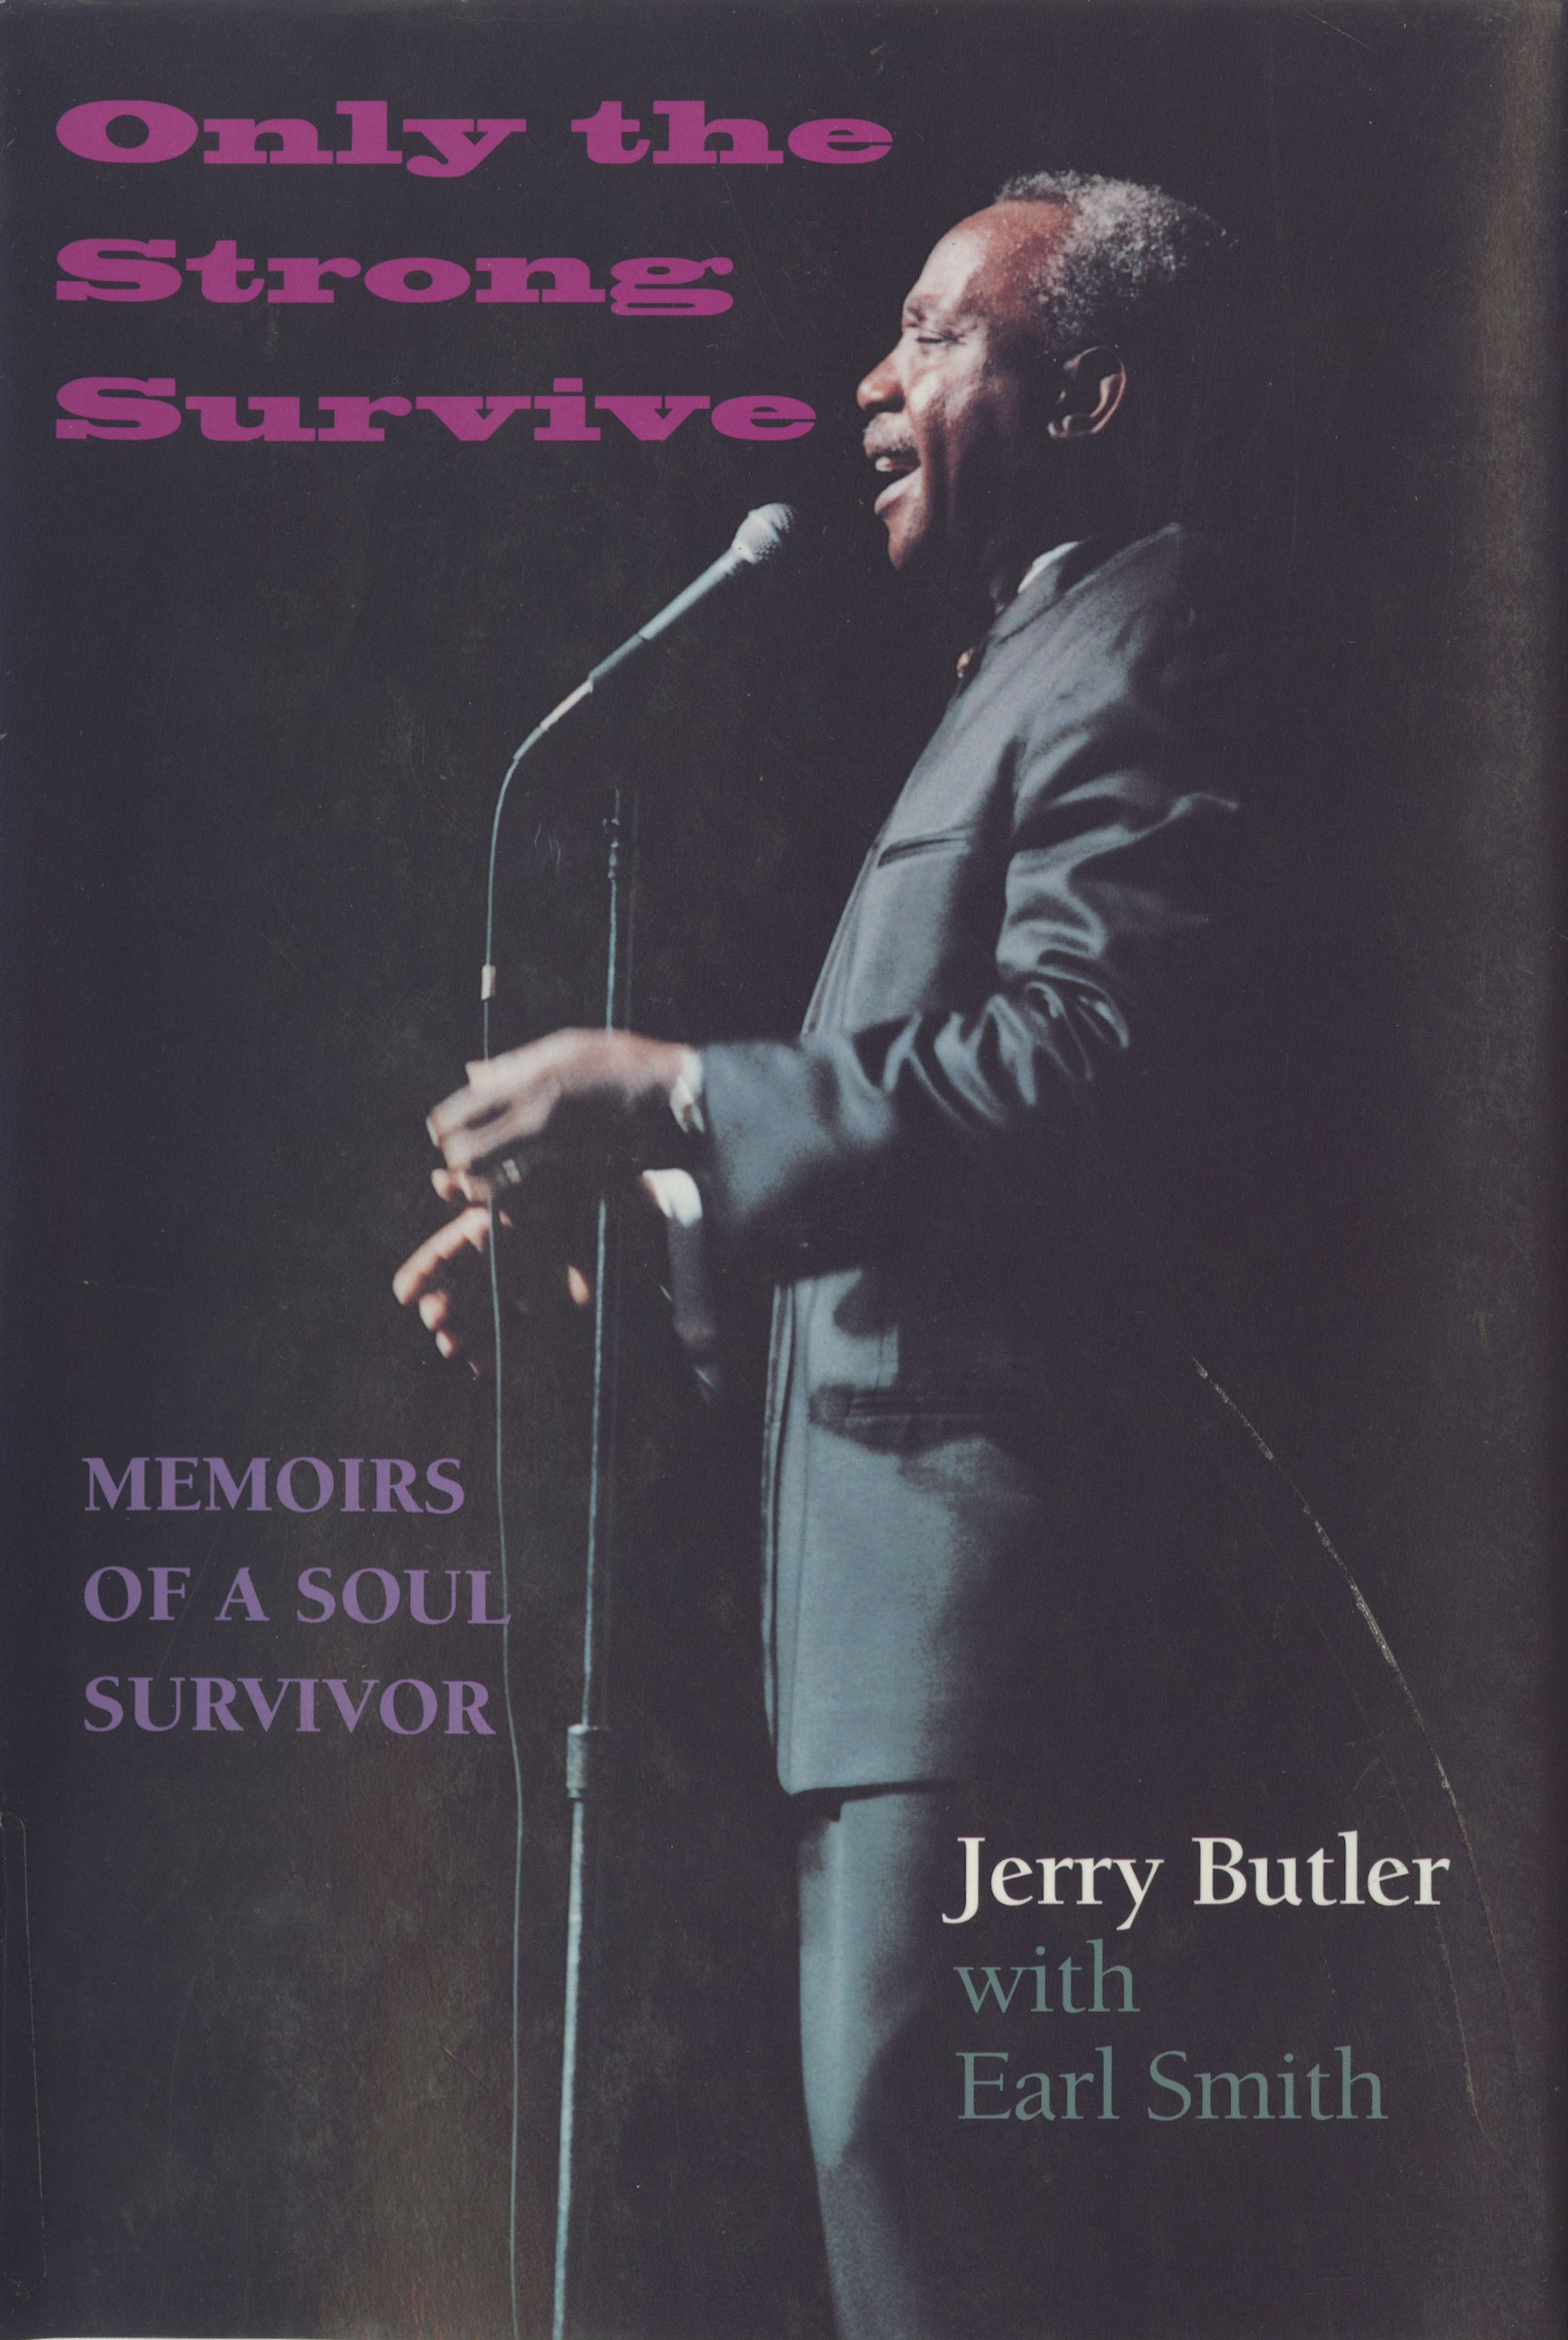 Only the Strong Survive: Memories of a Soul Survivor (2000) feature image